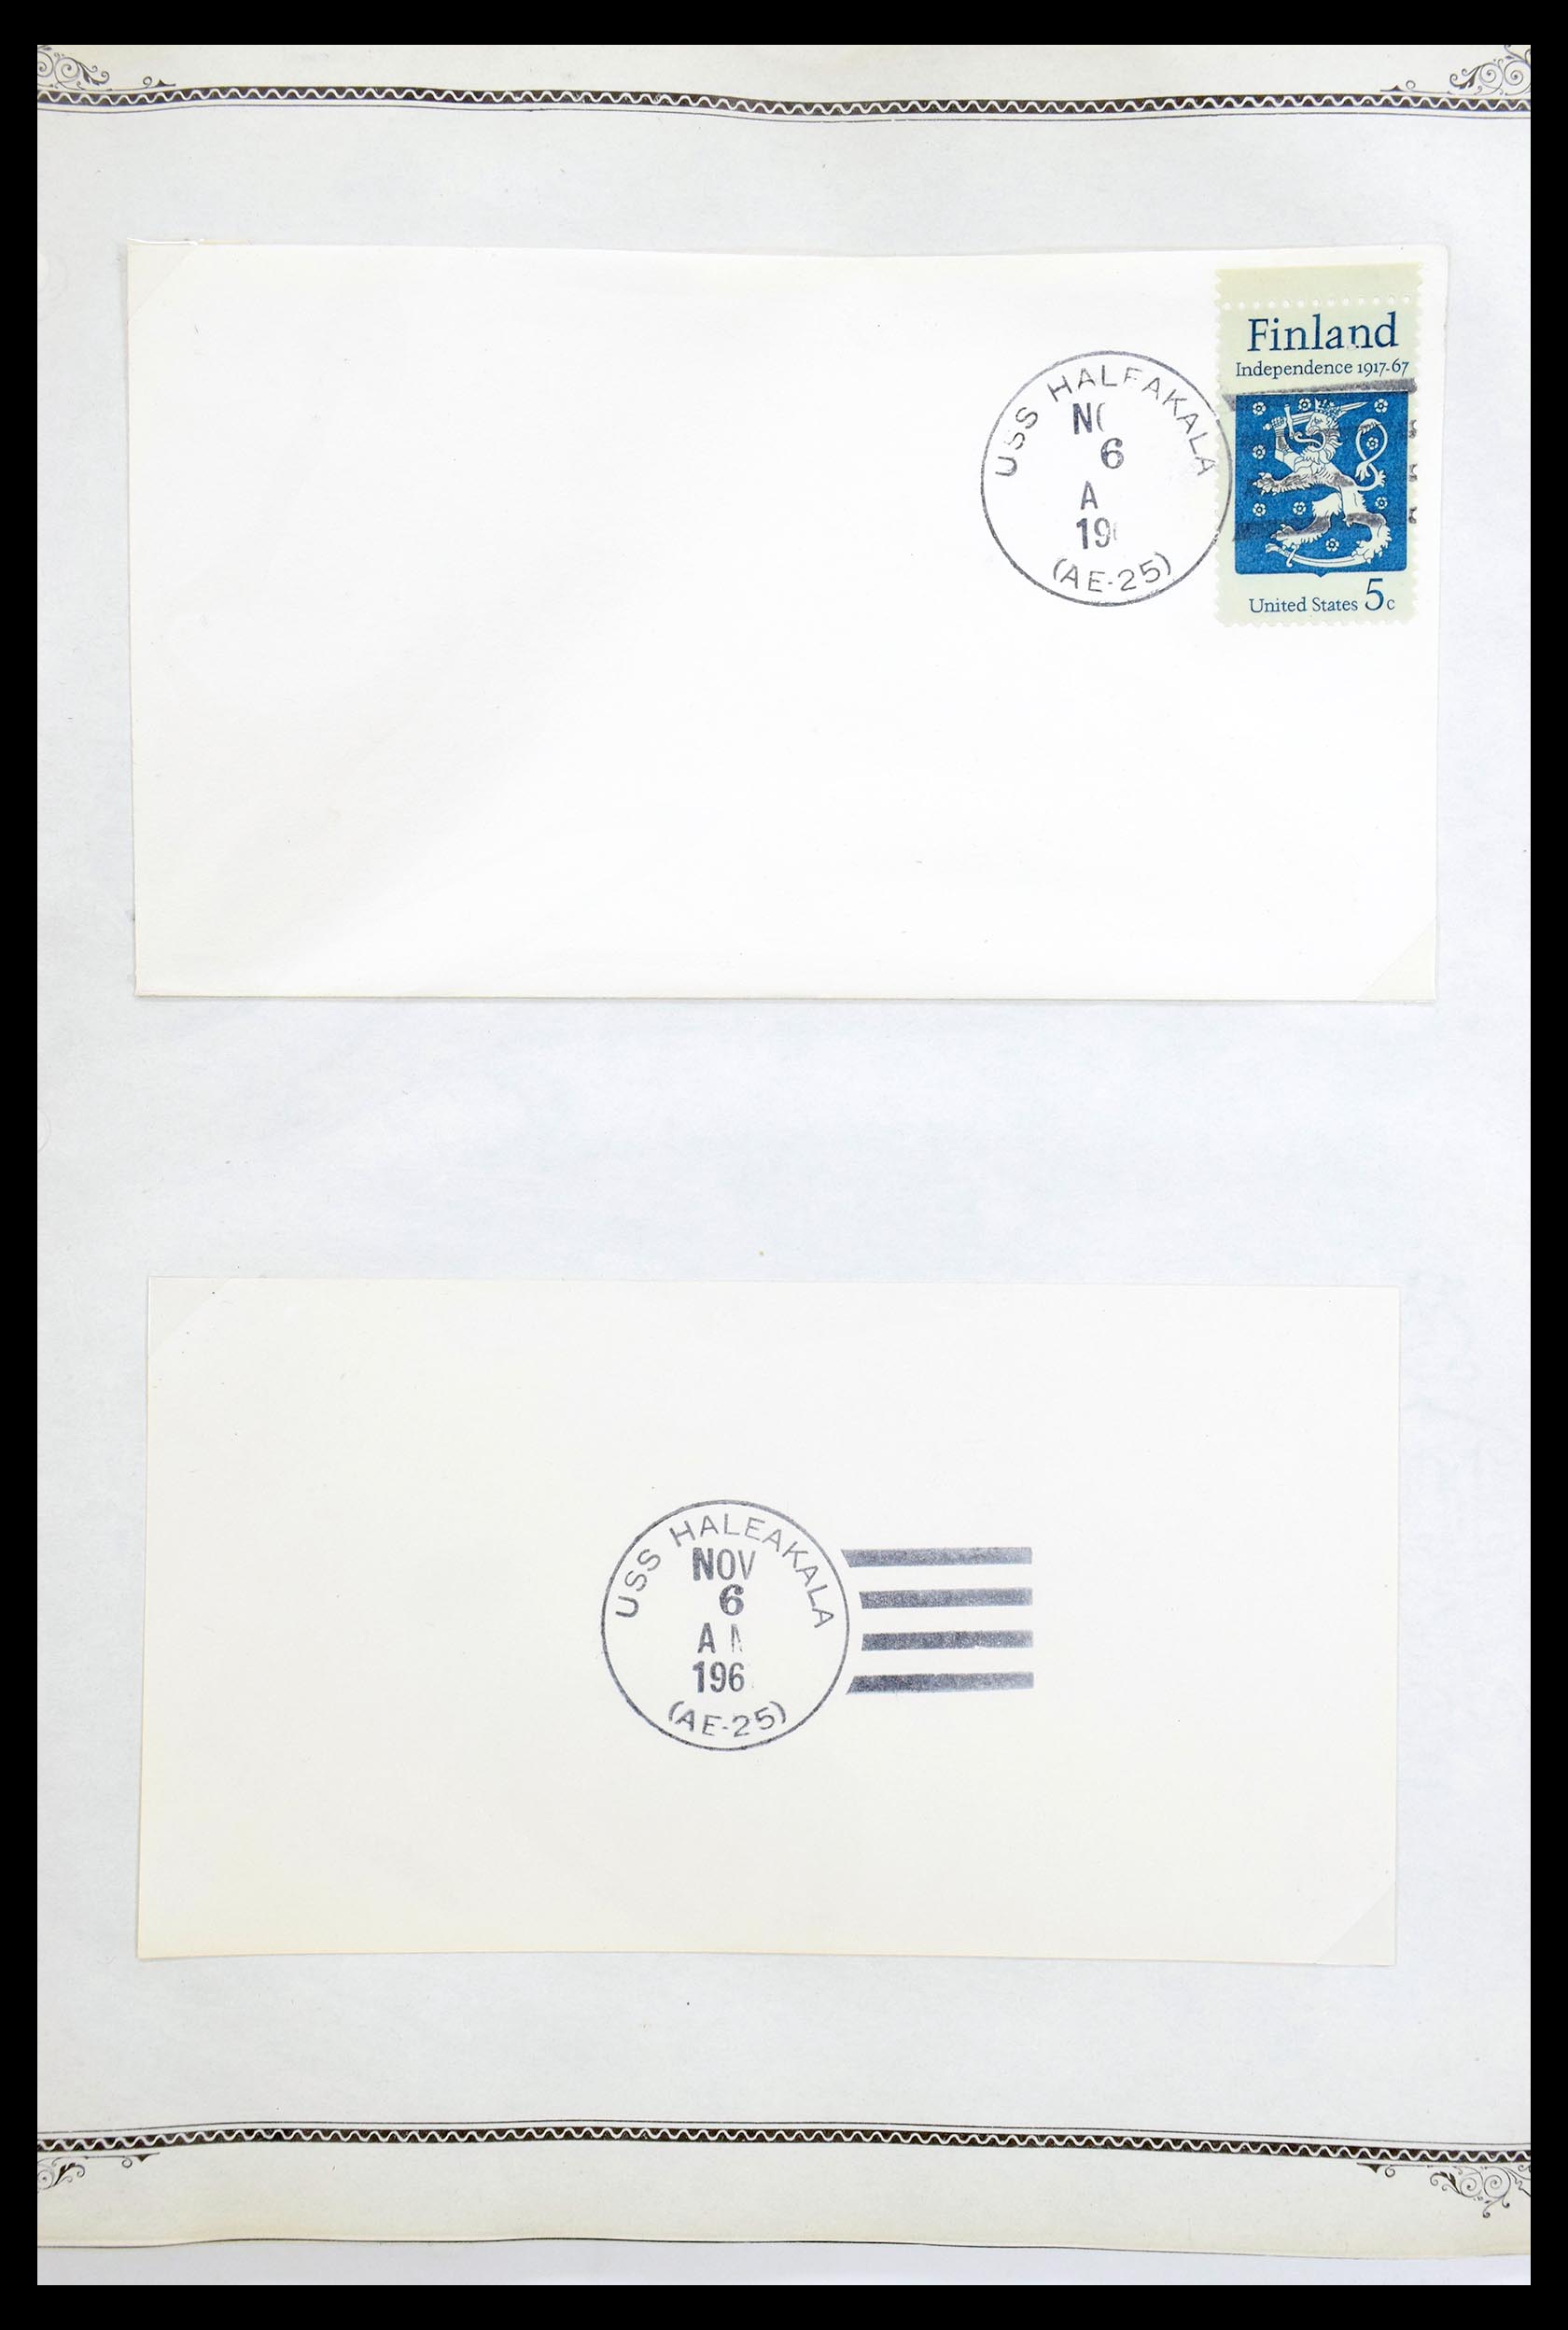 30341 022 - 30341 USA naval cover collection 1930-1970.